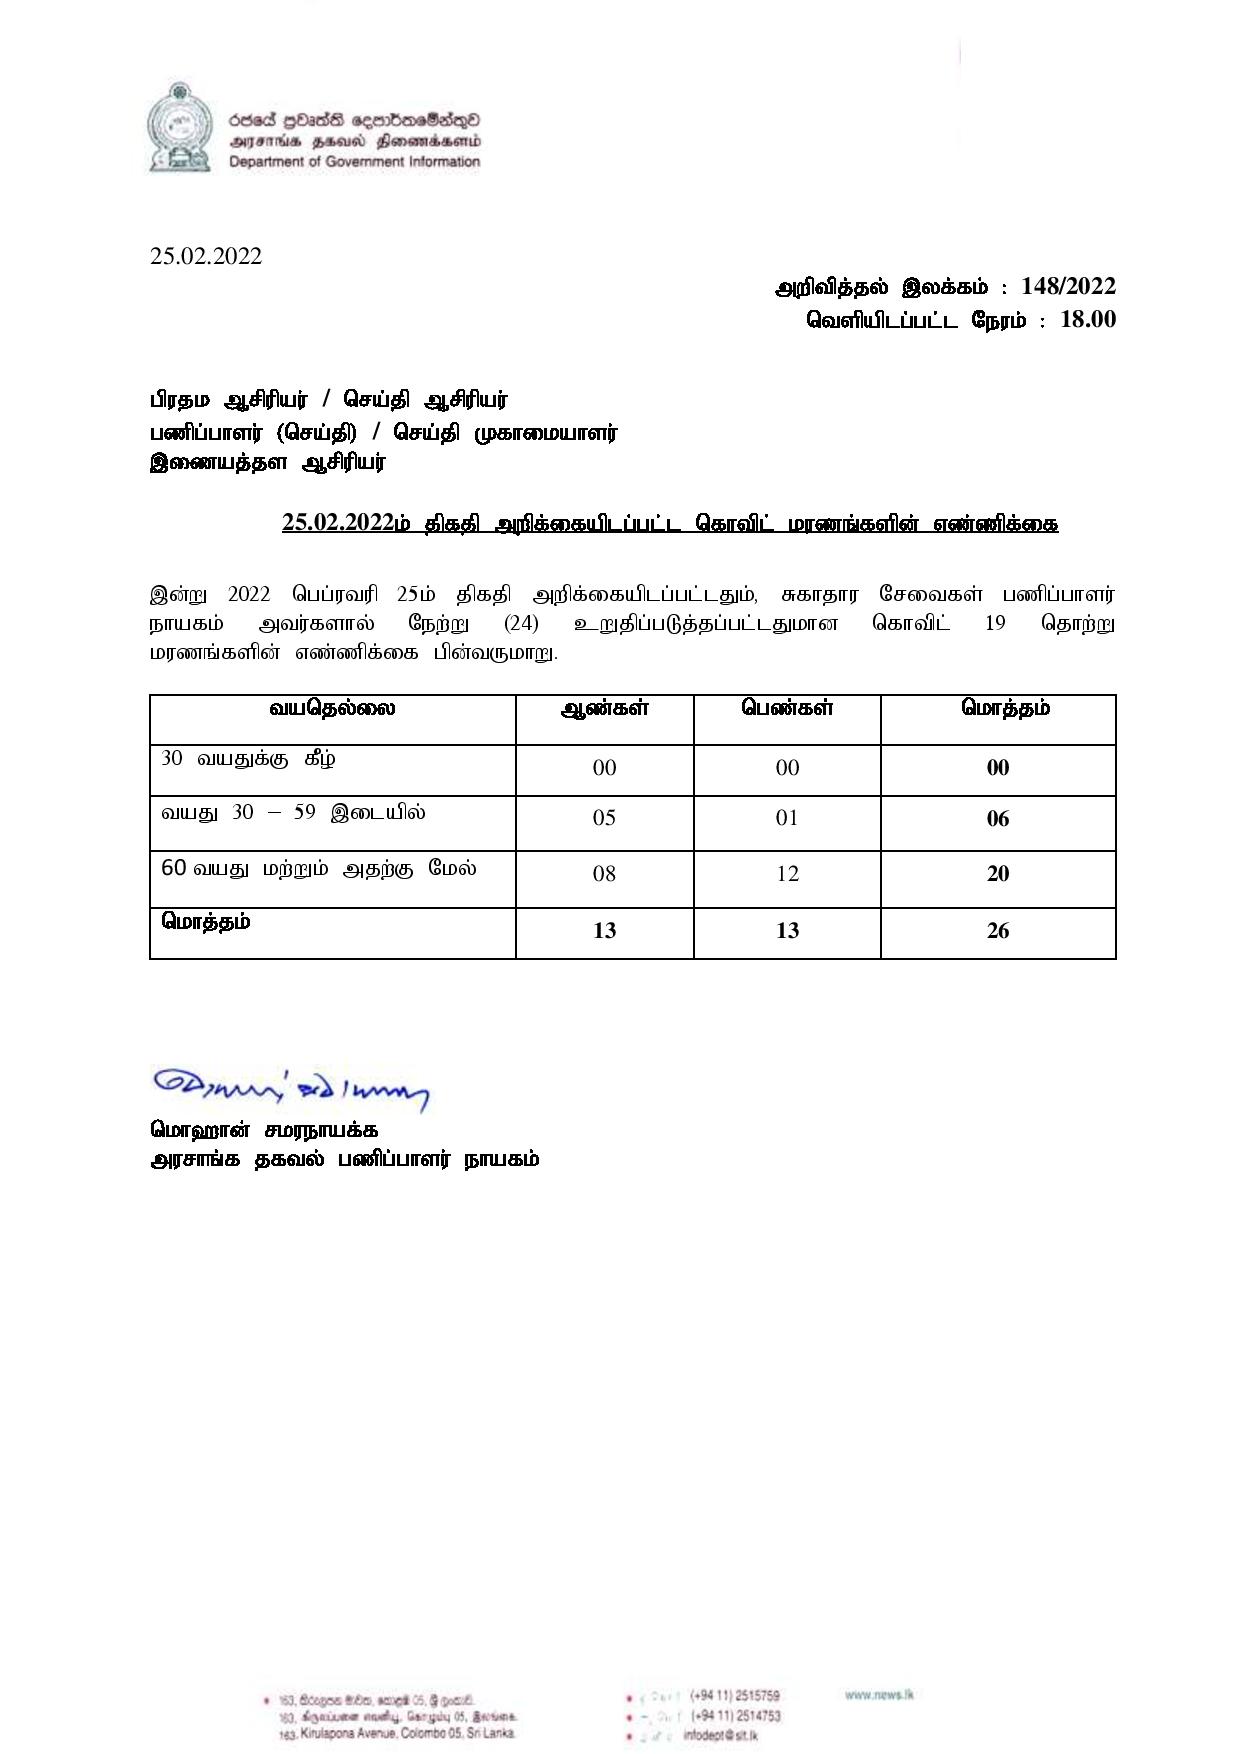 Release No 148Tamil page 001